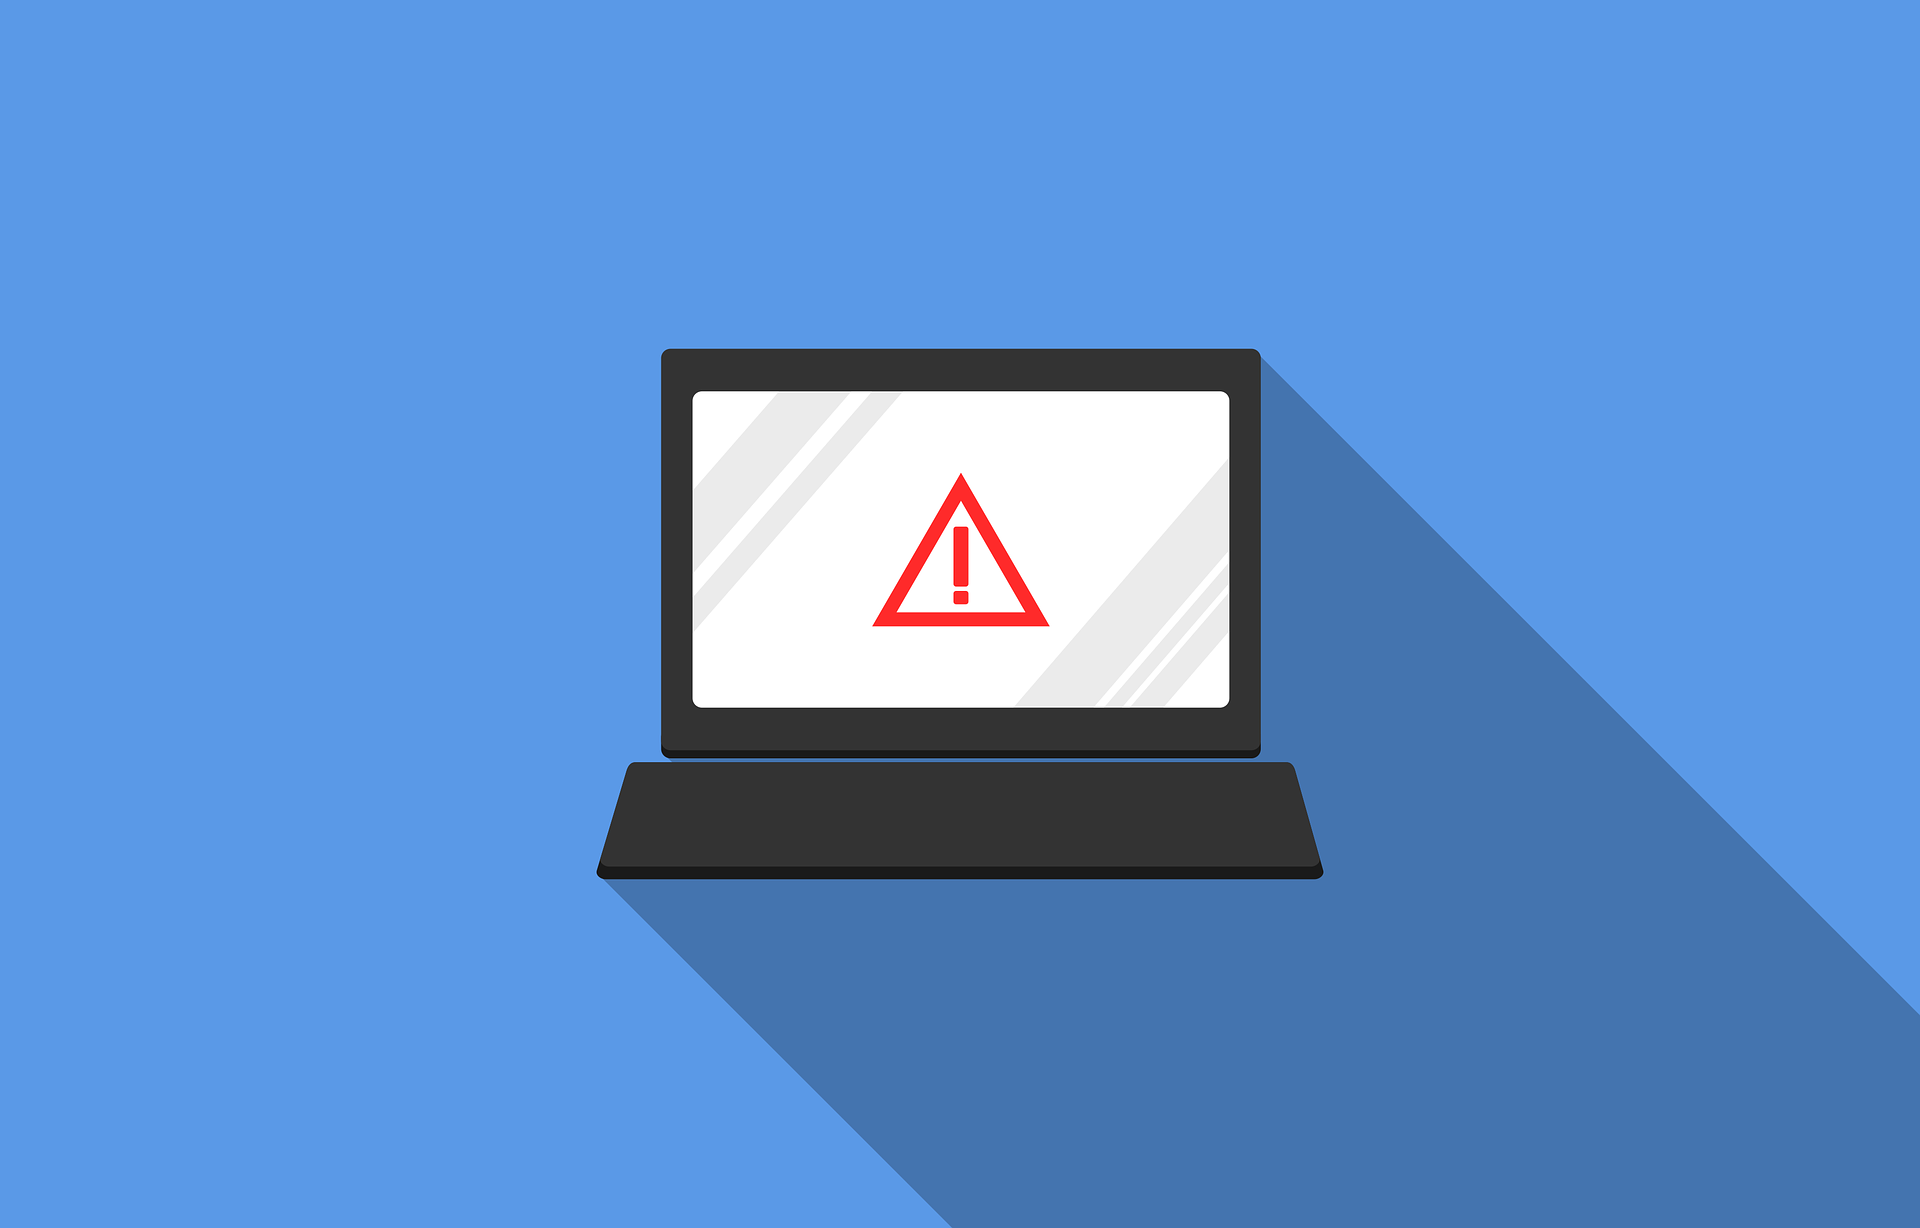 An illustration of a laptop screen with a warning alert